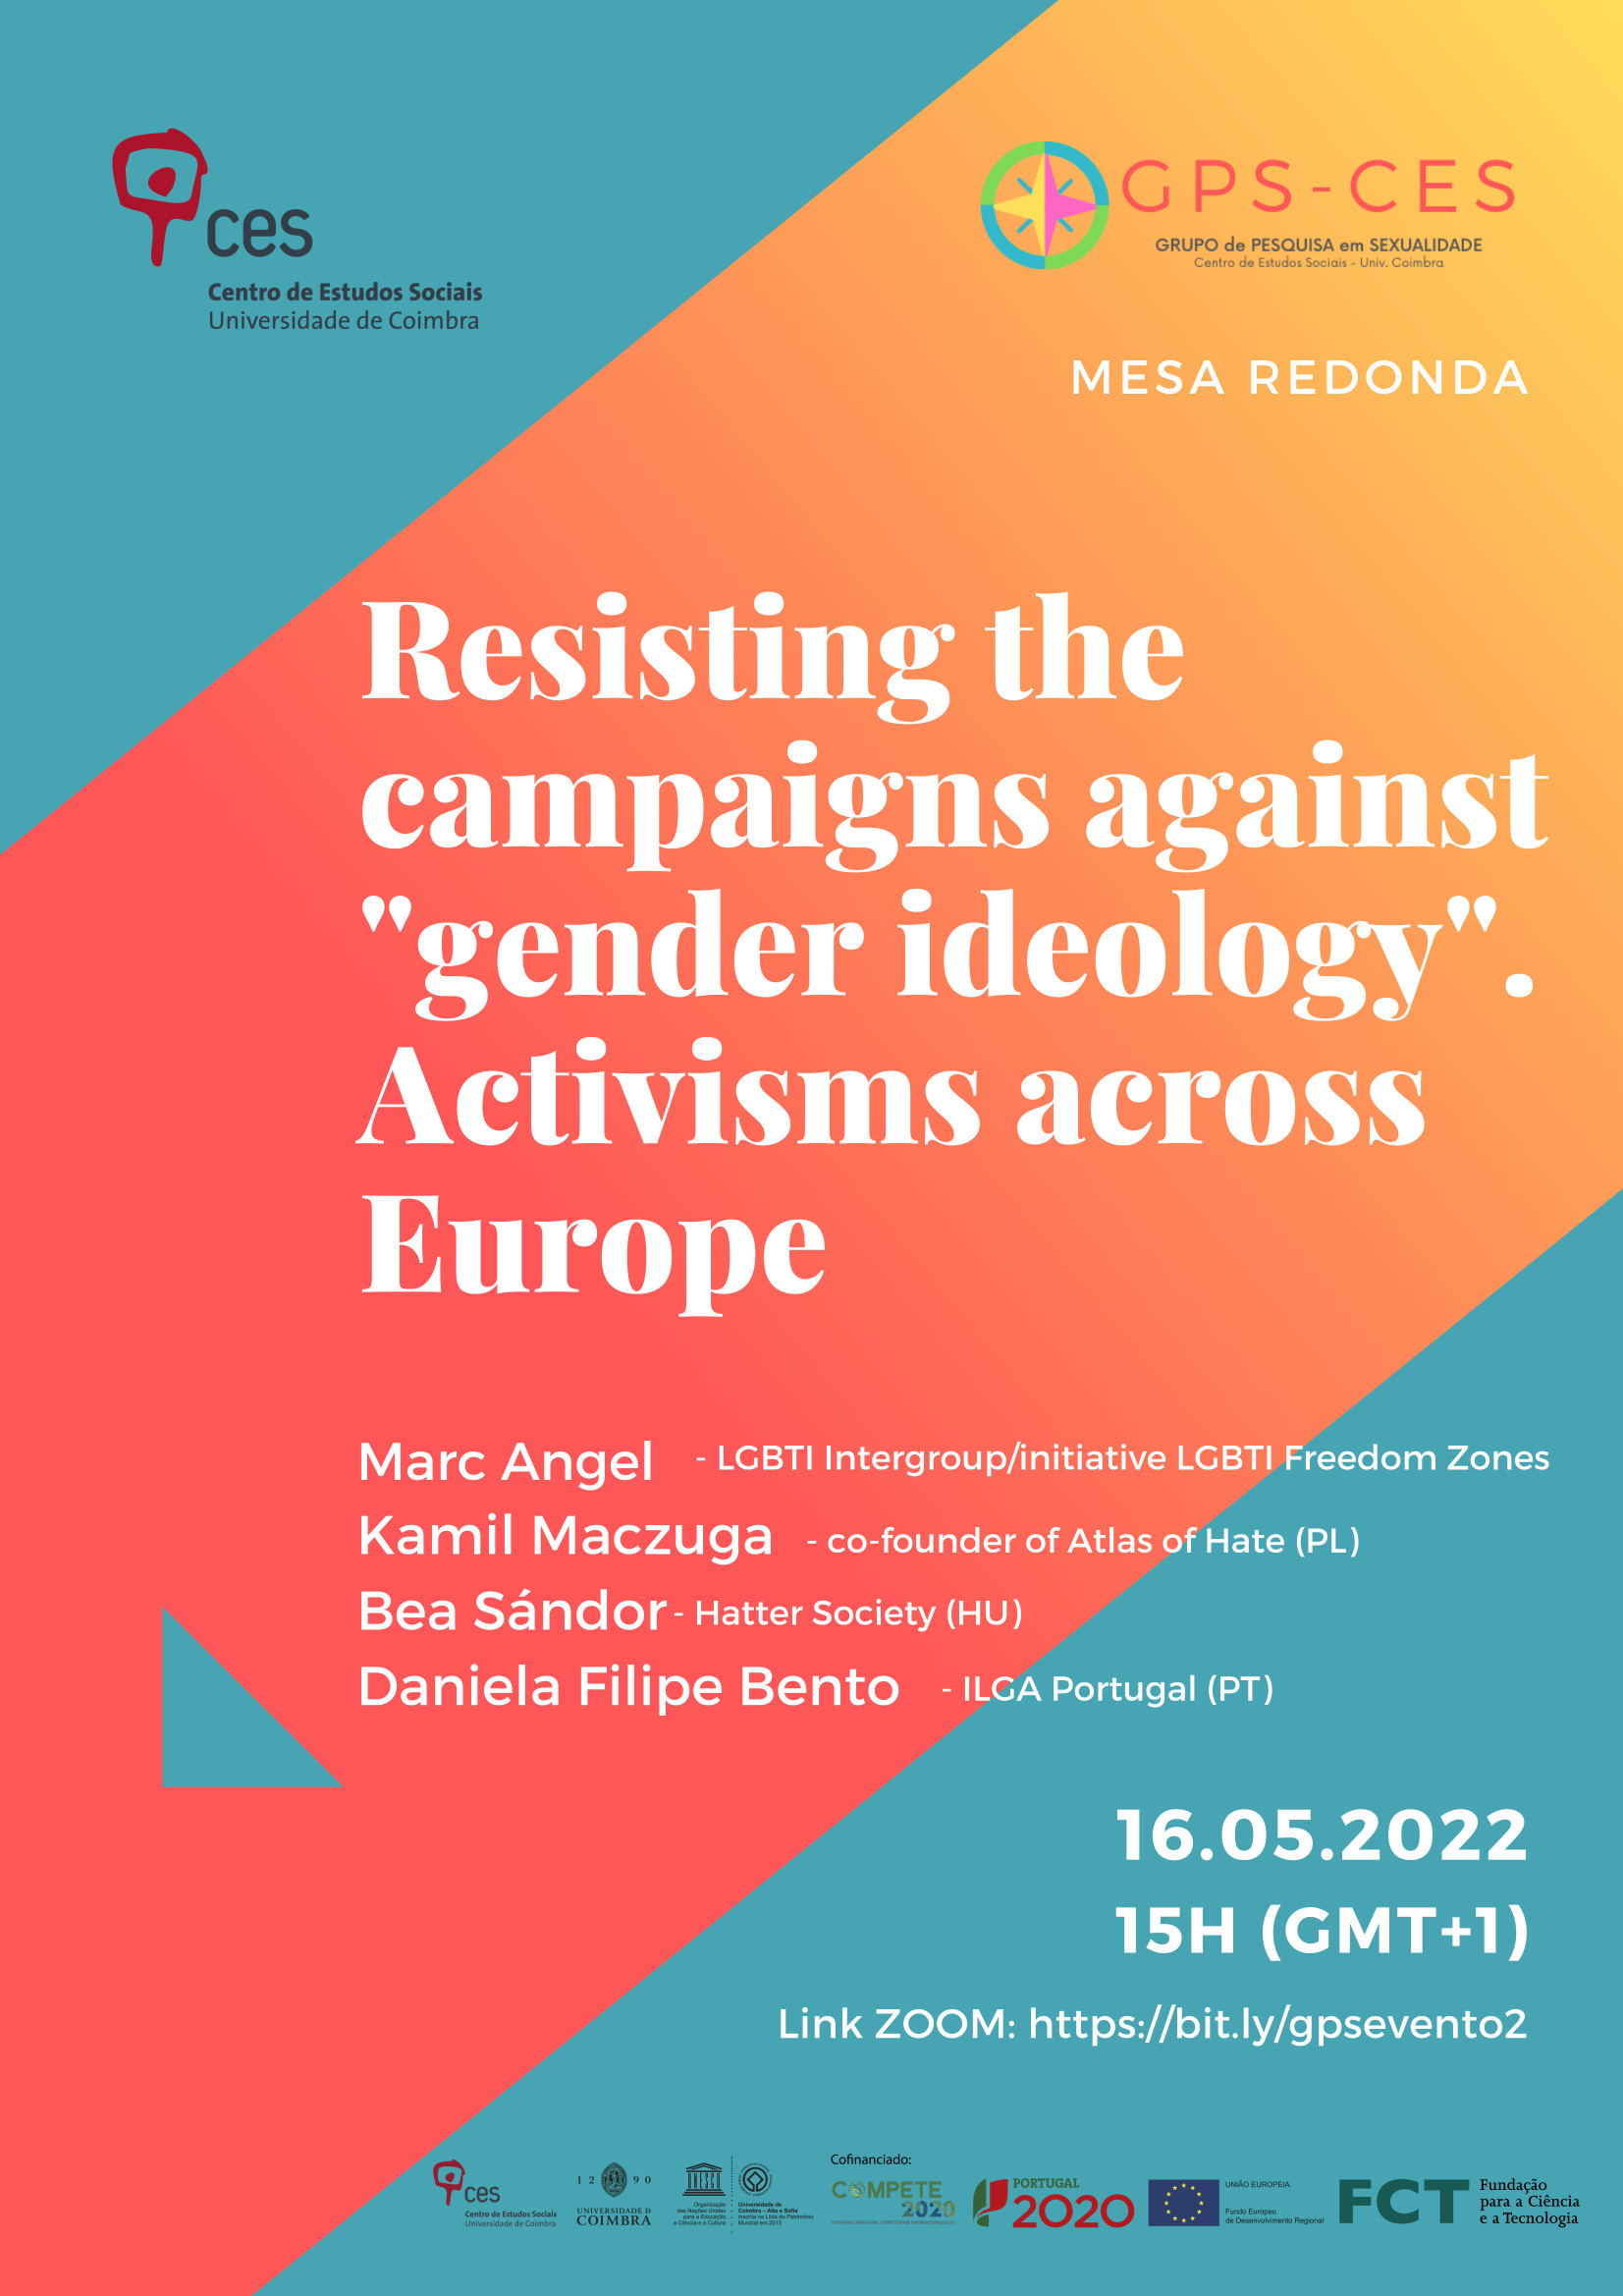 Resisting the campaigns against "gender ideology". Activisms across Europe<span id="edit_38478"><script>$(function() { $('#edit_38478').load( "/myces/user/editobj.php?tipo=evento&id=38478" ); });</script></span>